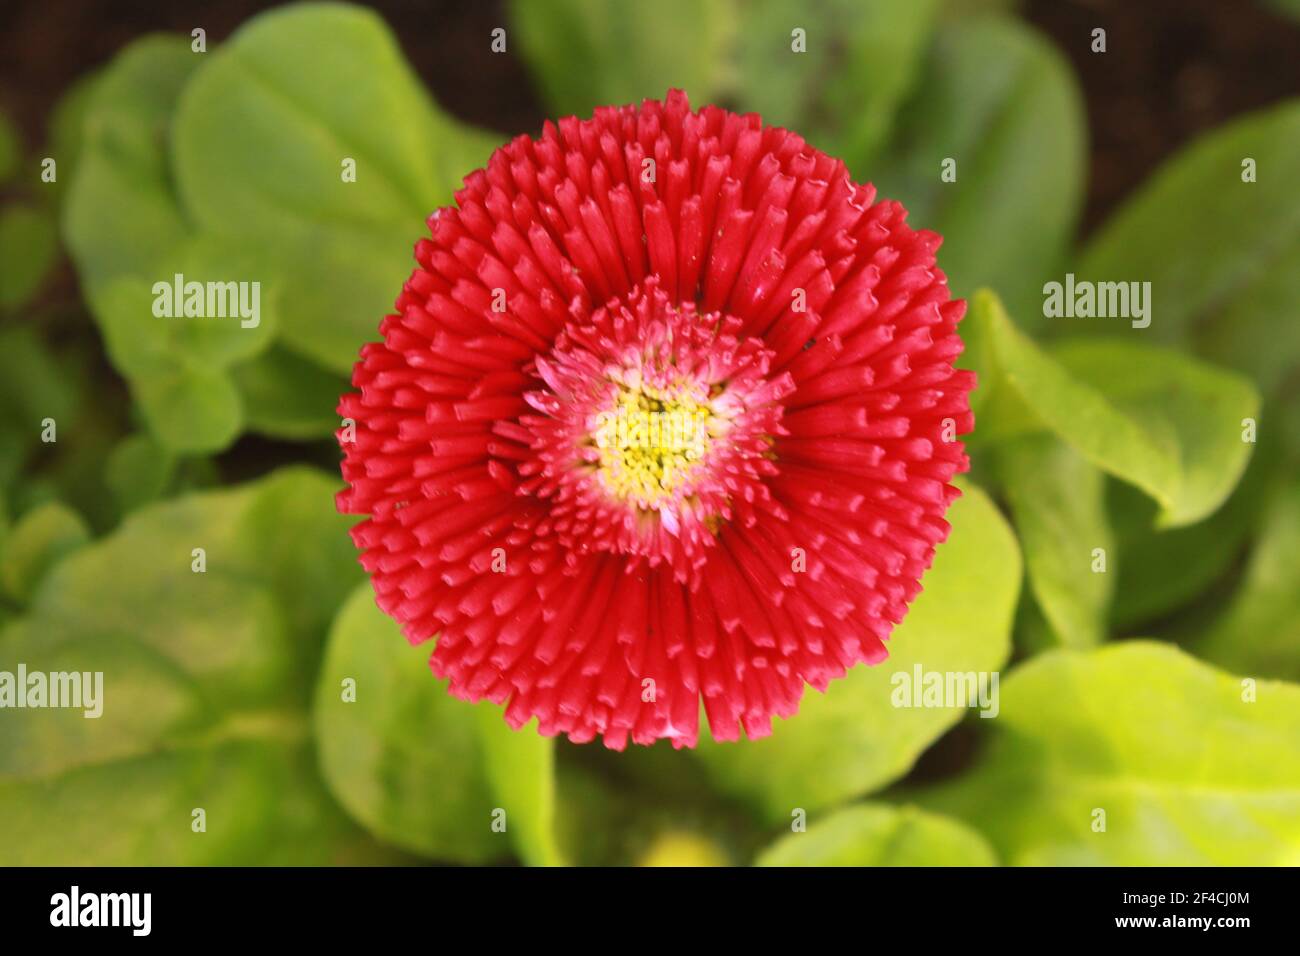 Red pompon daisy flower found in a spring garden. Red Bellis Perennis (pomponette) and rosette of spoon shaped green leaves. Spring Daisy plants UK. Stock Photo